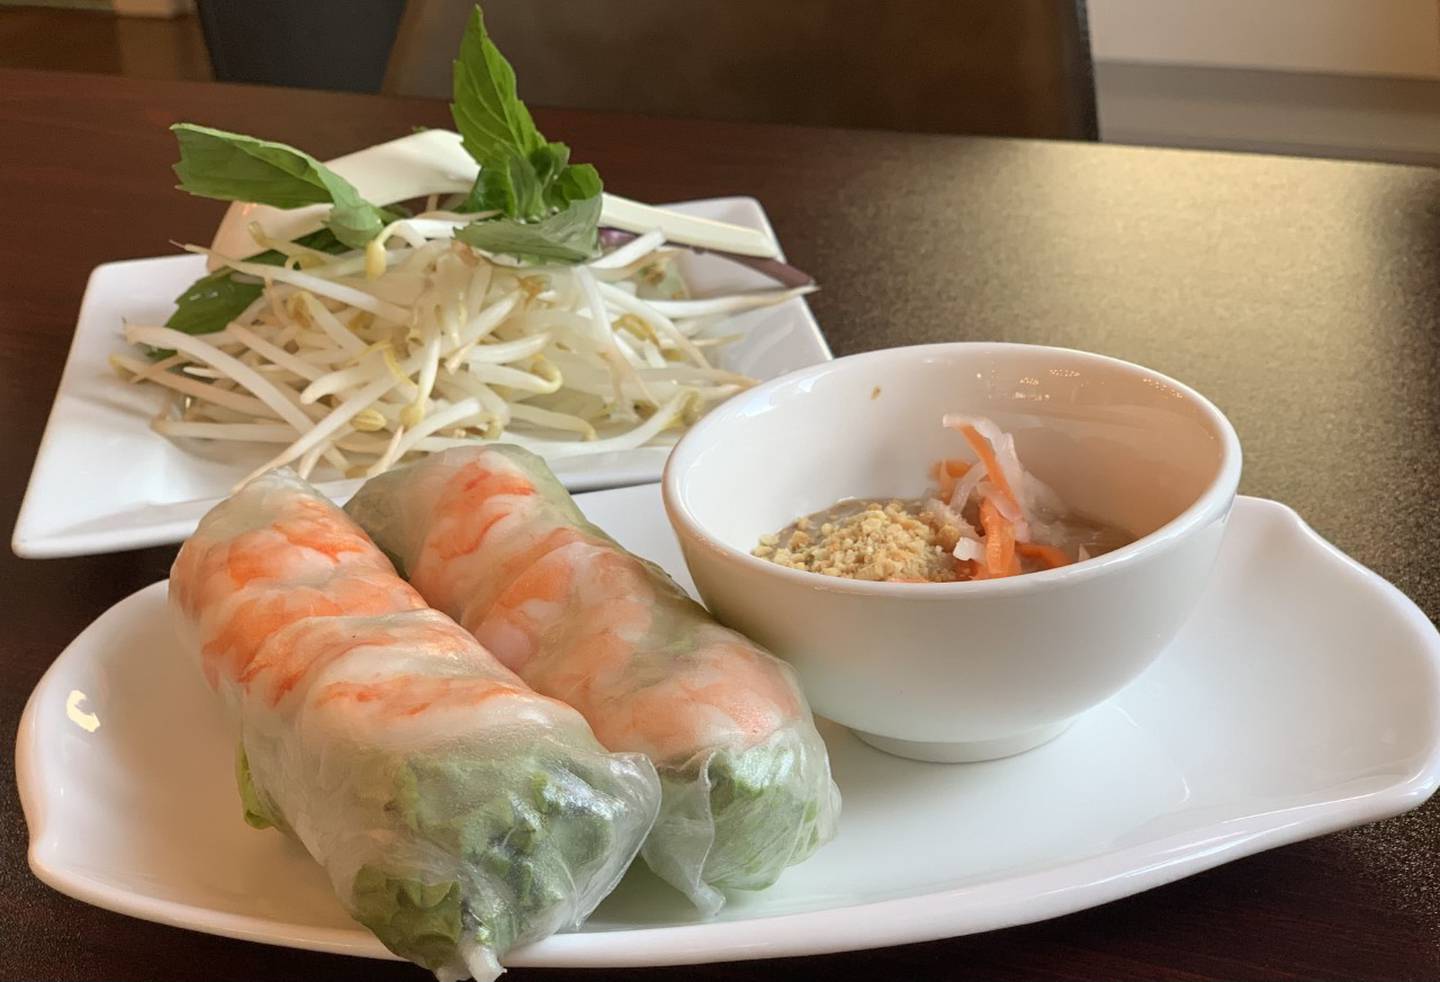 Spring rolls at Pho Ly in St. Charles.